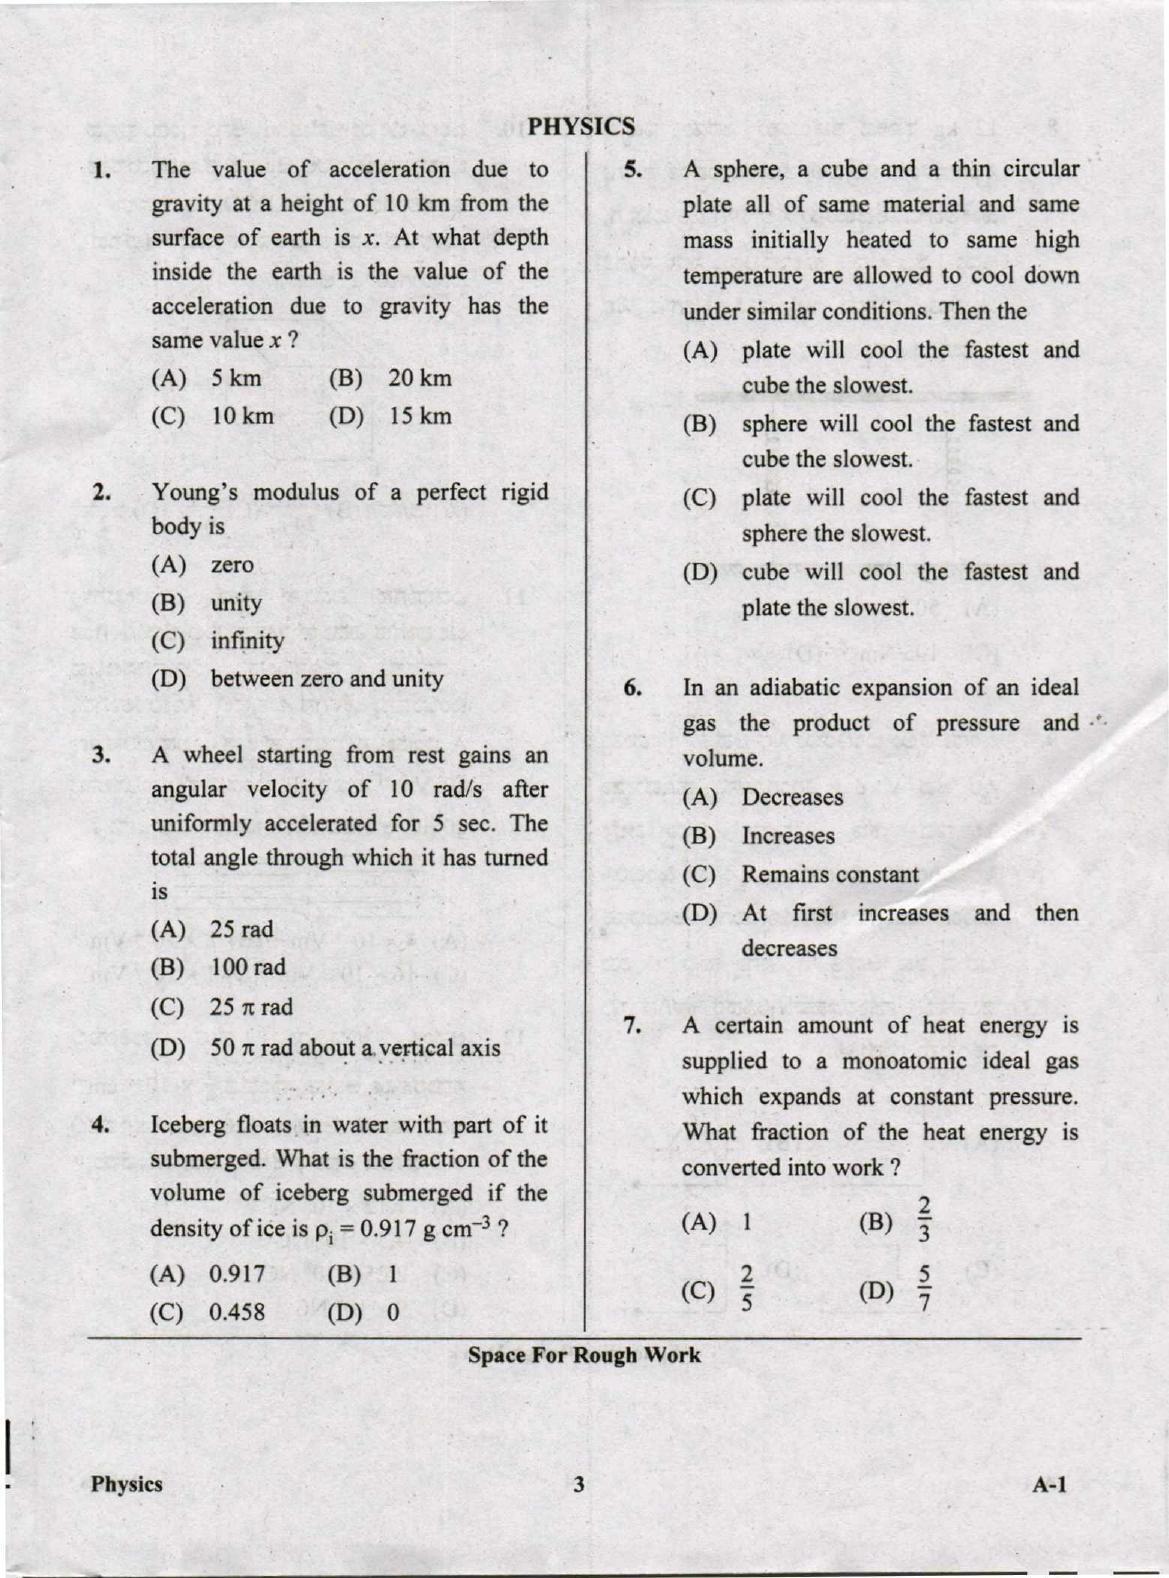 KCET Physics 2020 Question Papers - Page 3